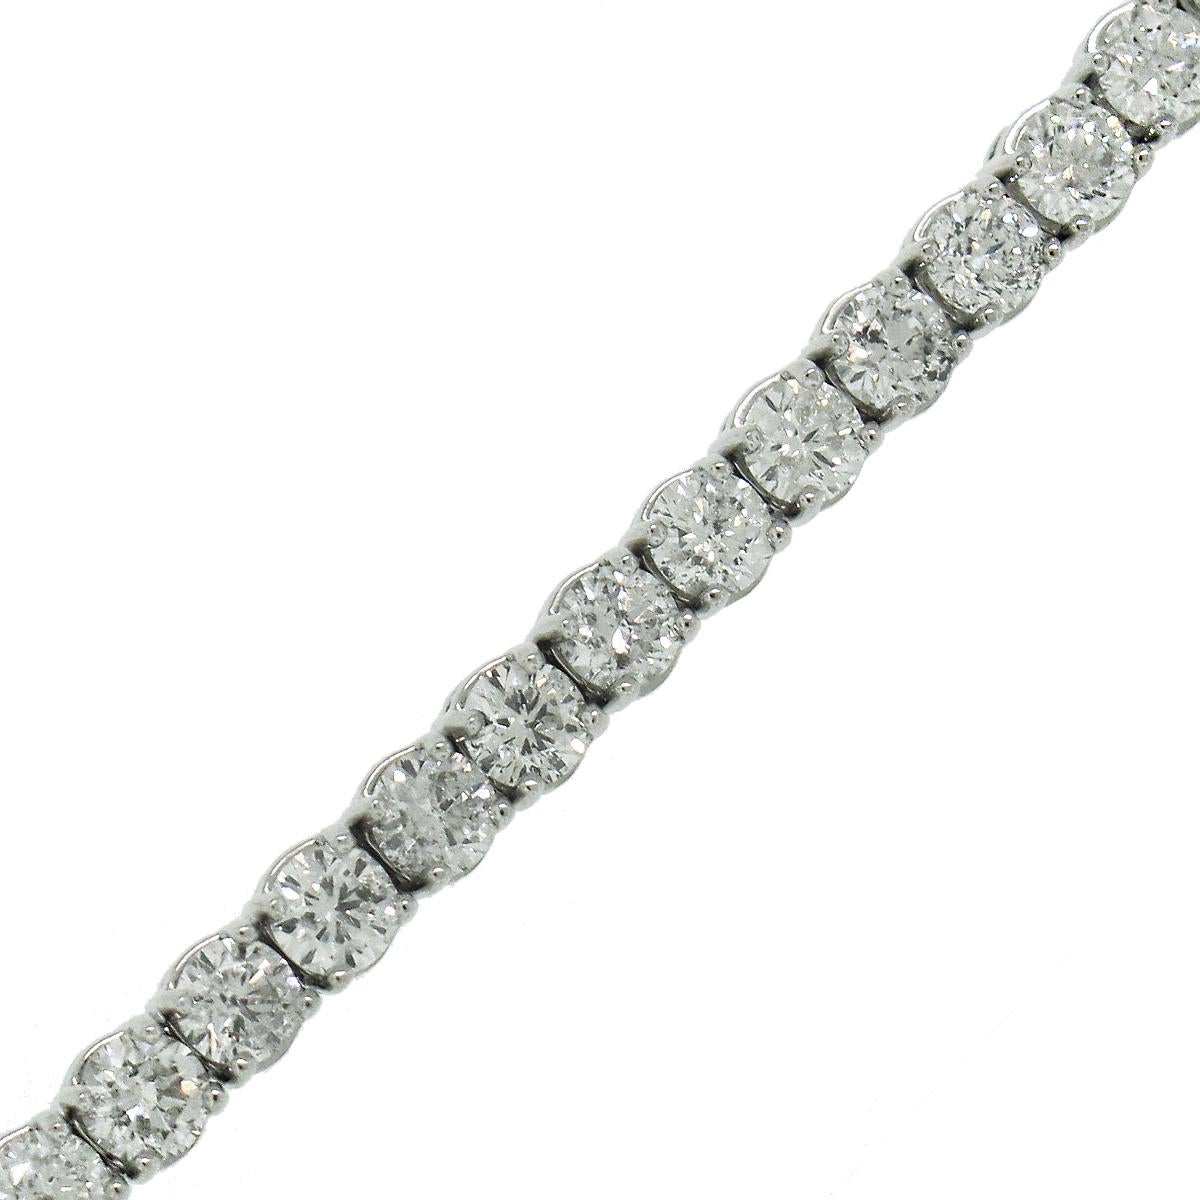 Material: 14k White Gold
Diamond Details: Approximately 9.41ctw round brilliant diamonds. Diamonds are H/I in color and SI1-SI2 in clarity.
Clasps: Tongue in box with safety latch
Total Weight: 16.5g (10.6dwt)
Length: 6.75